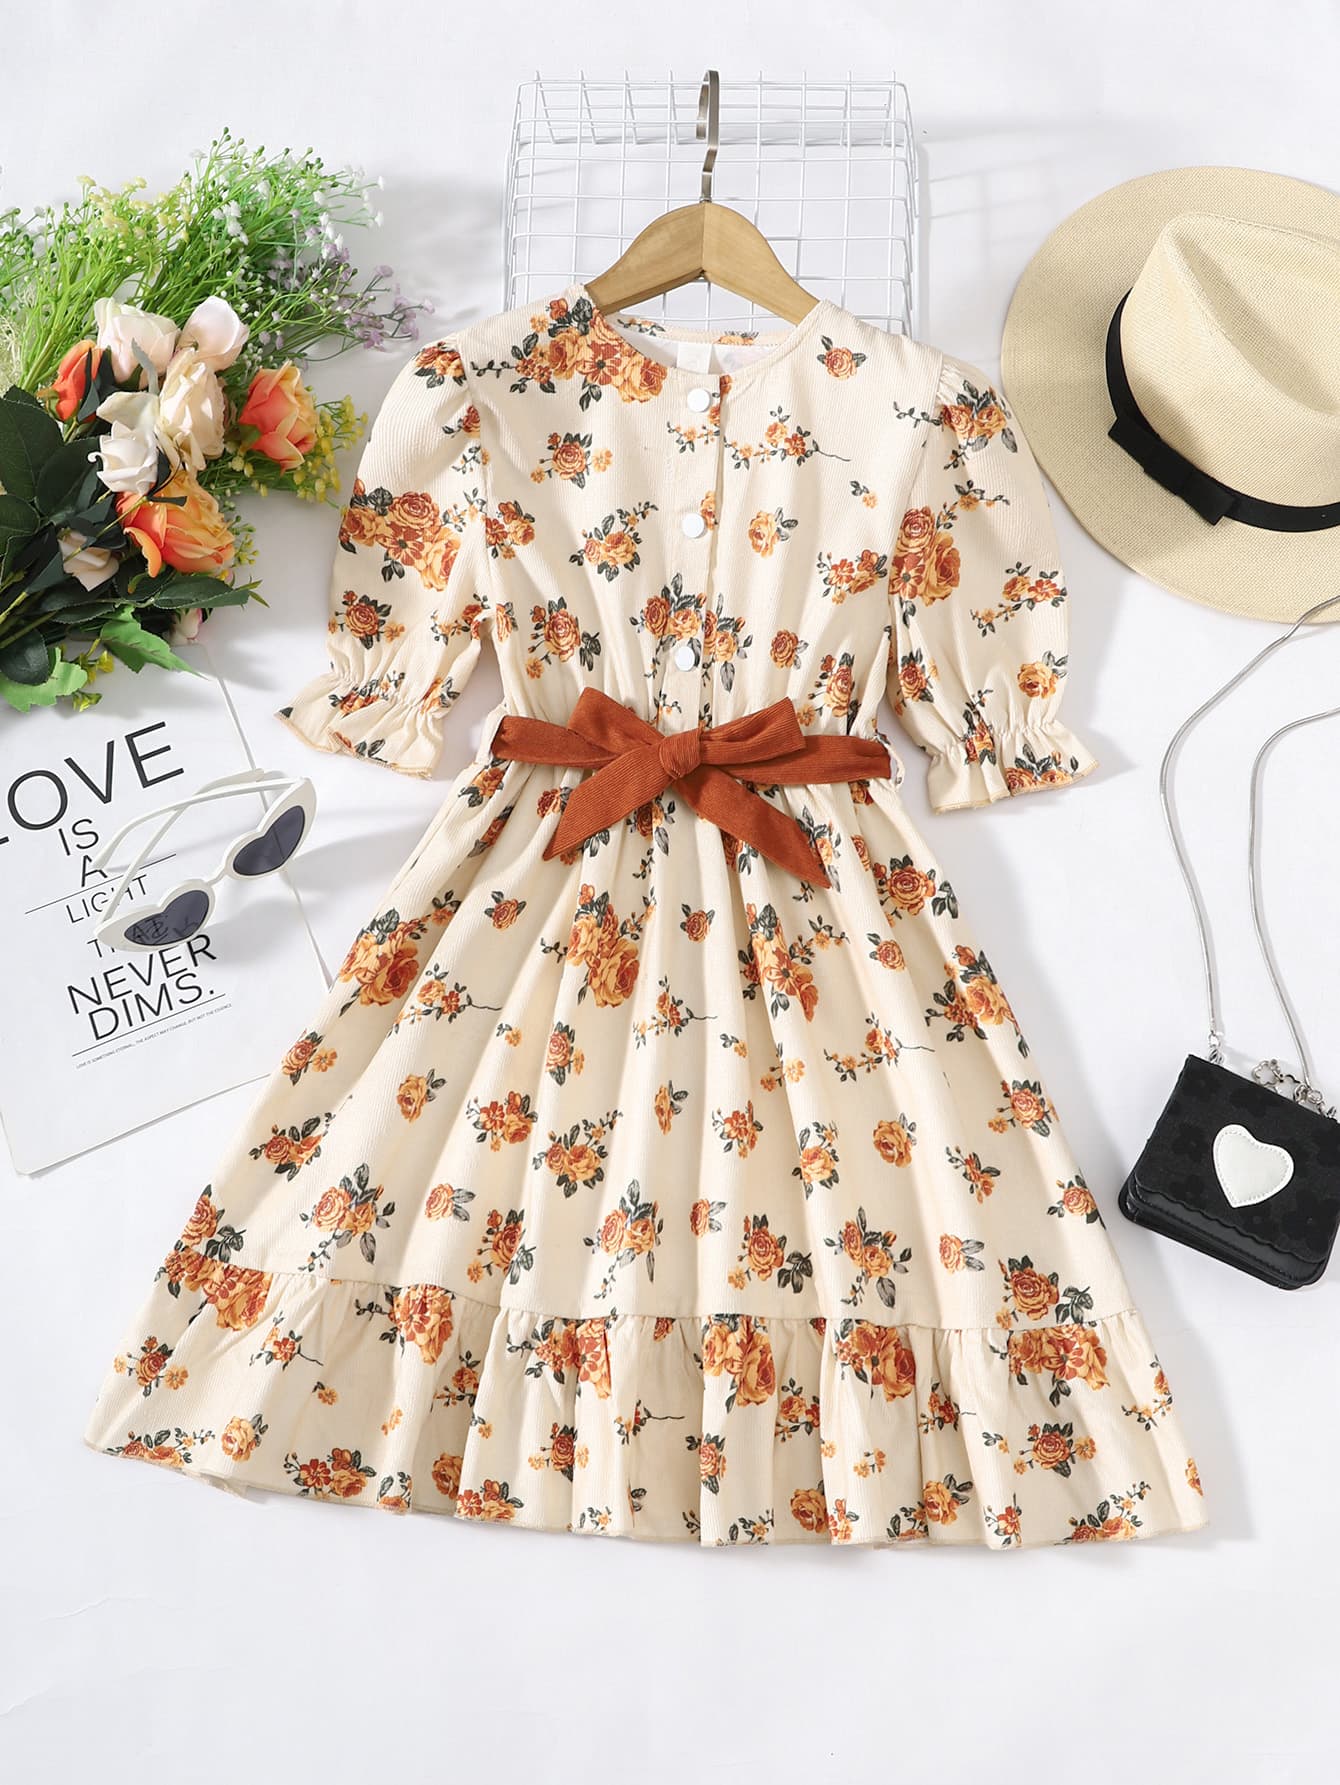 Girls Floral Tied Puff Sleeve Dress, Age: 8 - 12 years old